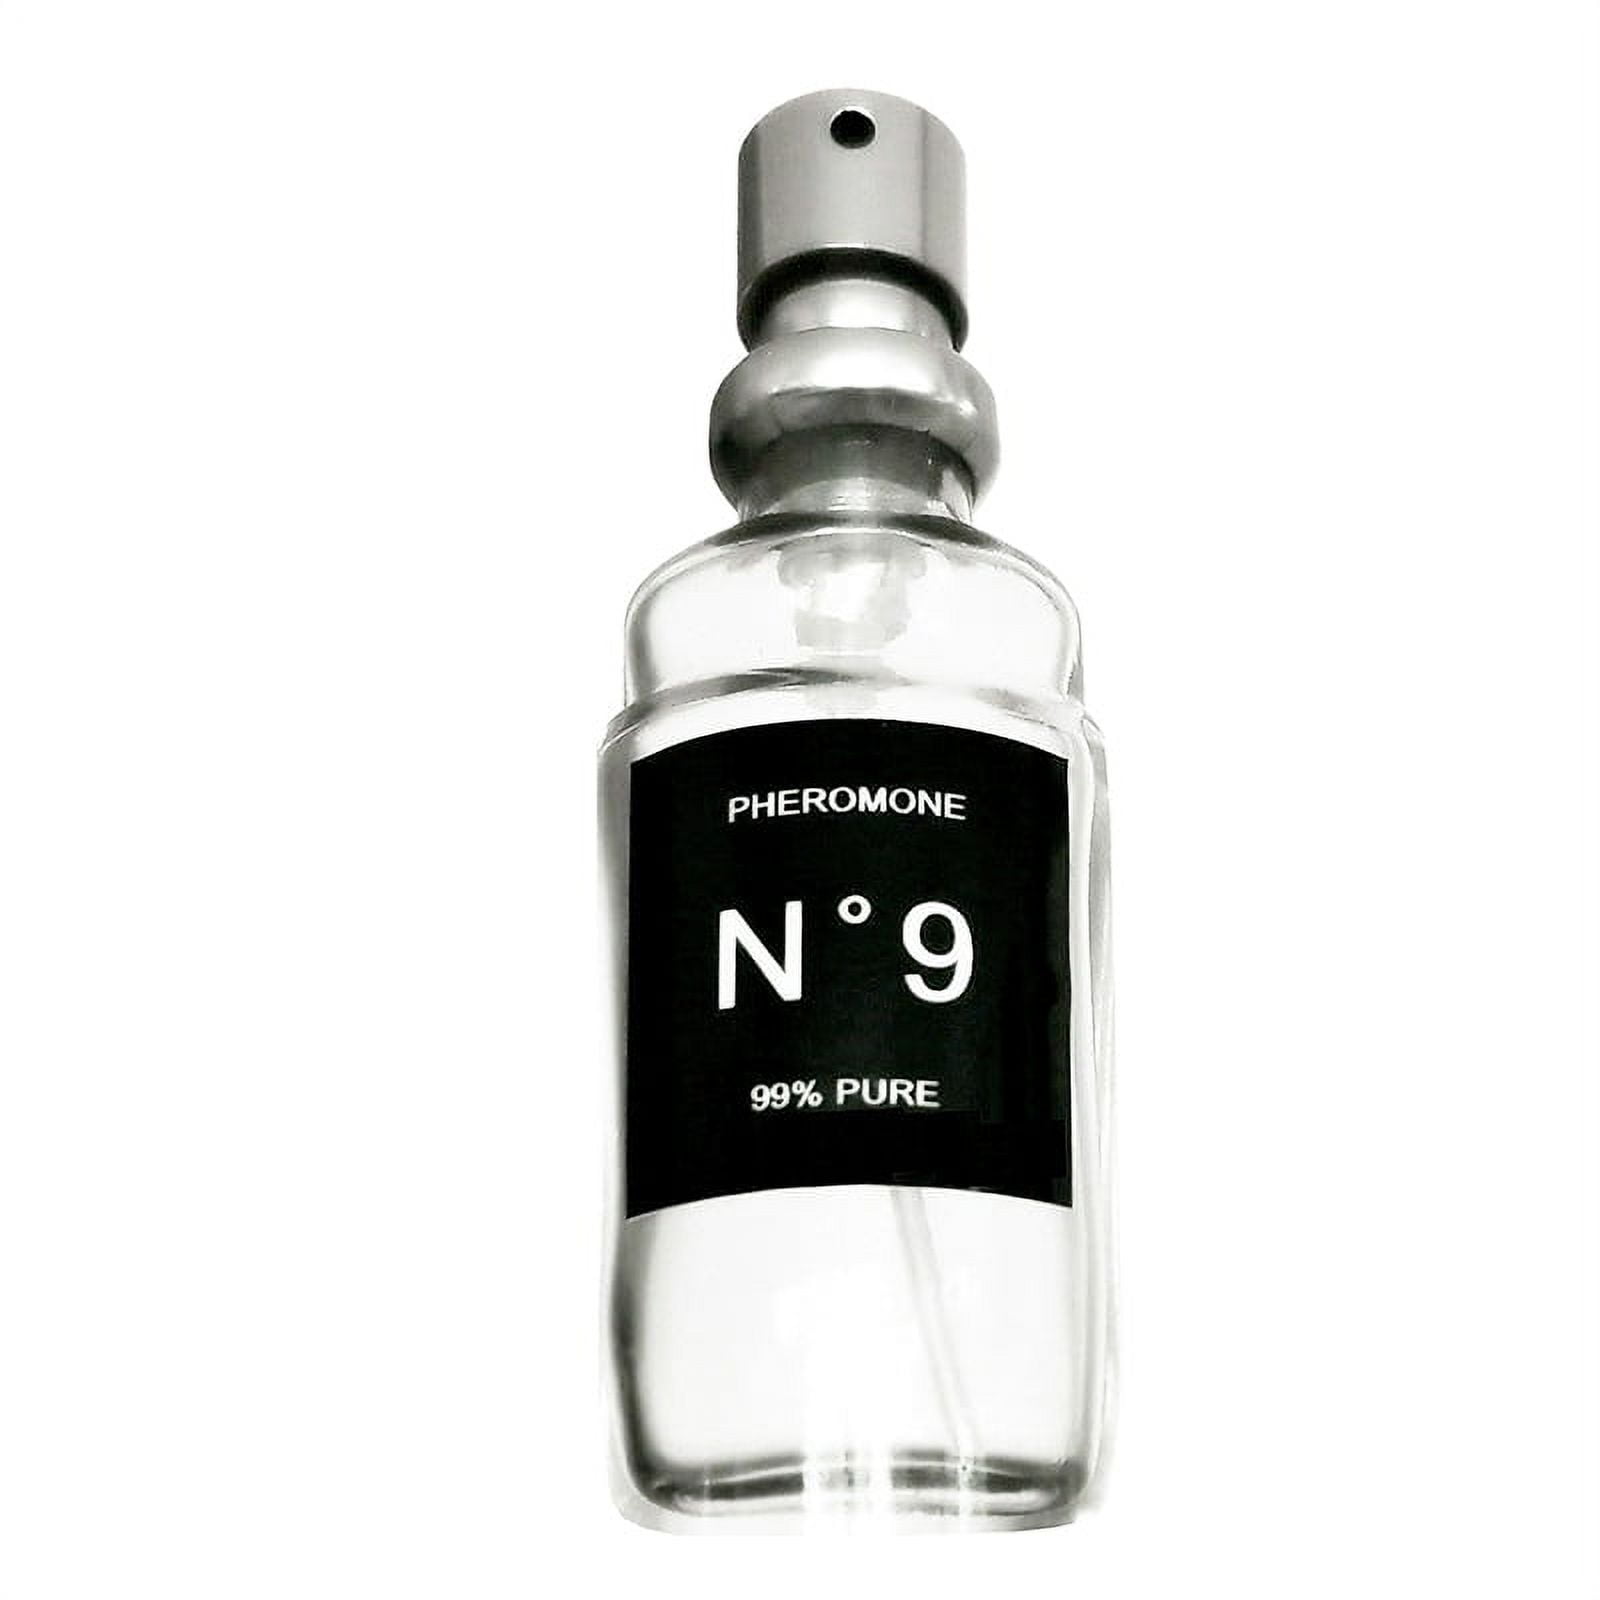  N o 9 Bask Pheromone Perfume (1.75 oz.) for Women to Attract  Men - 99 Percent Pure Pheromones Infused Cologne Spray for Her–Concentrated  Female Feromone for Love Attraction – White